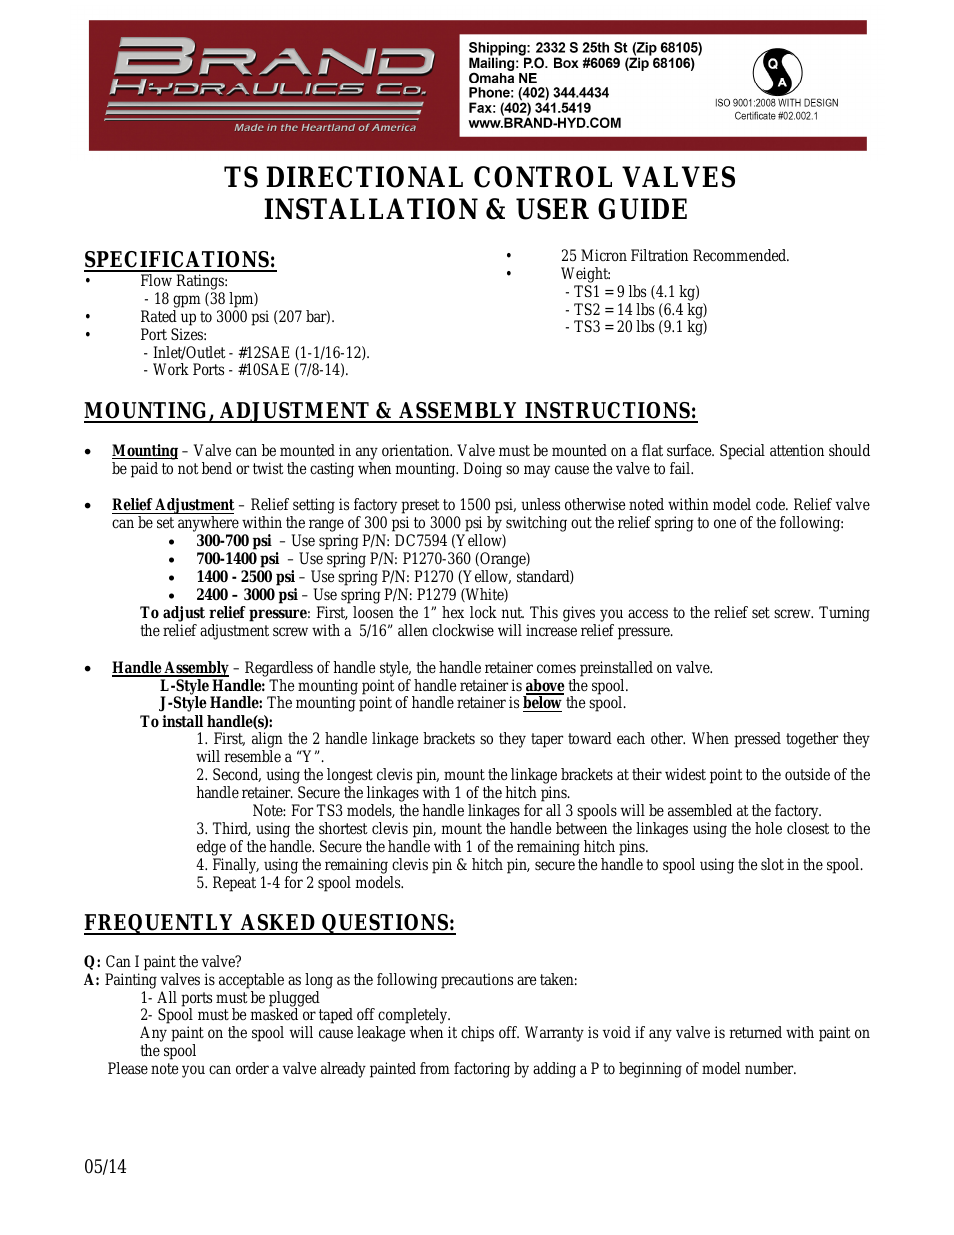 TS DIRECTIONAL CONTROL VALVES